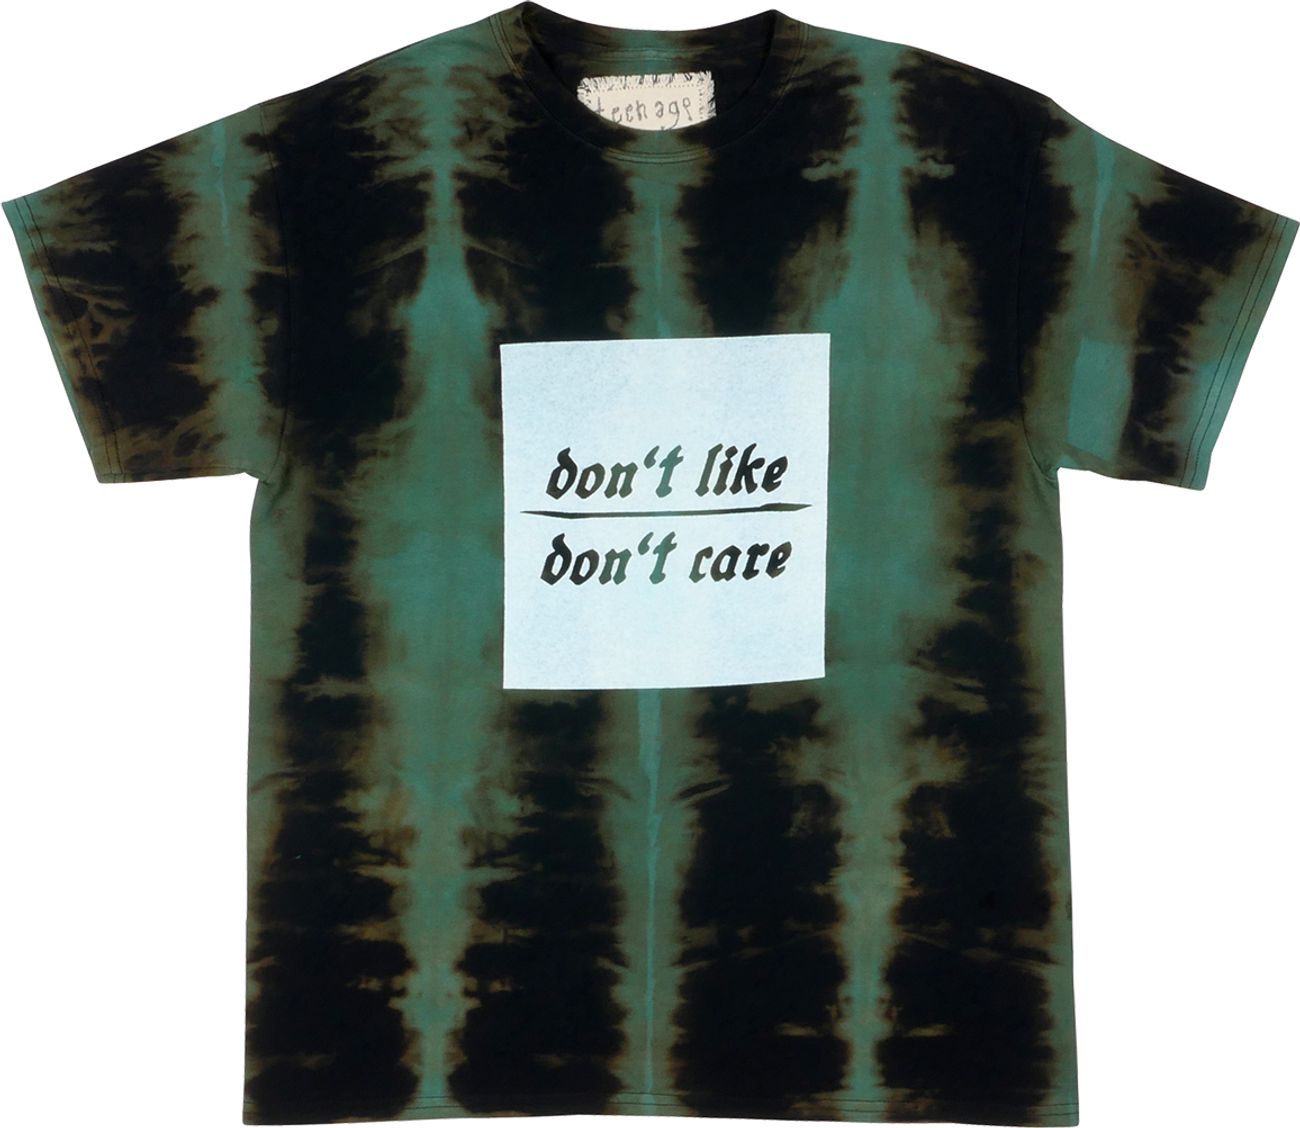 Teenage Angst "Don't like, don't care" T-Shirt - tie dye vertical blue